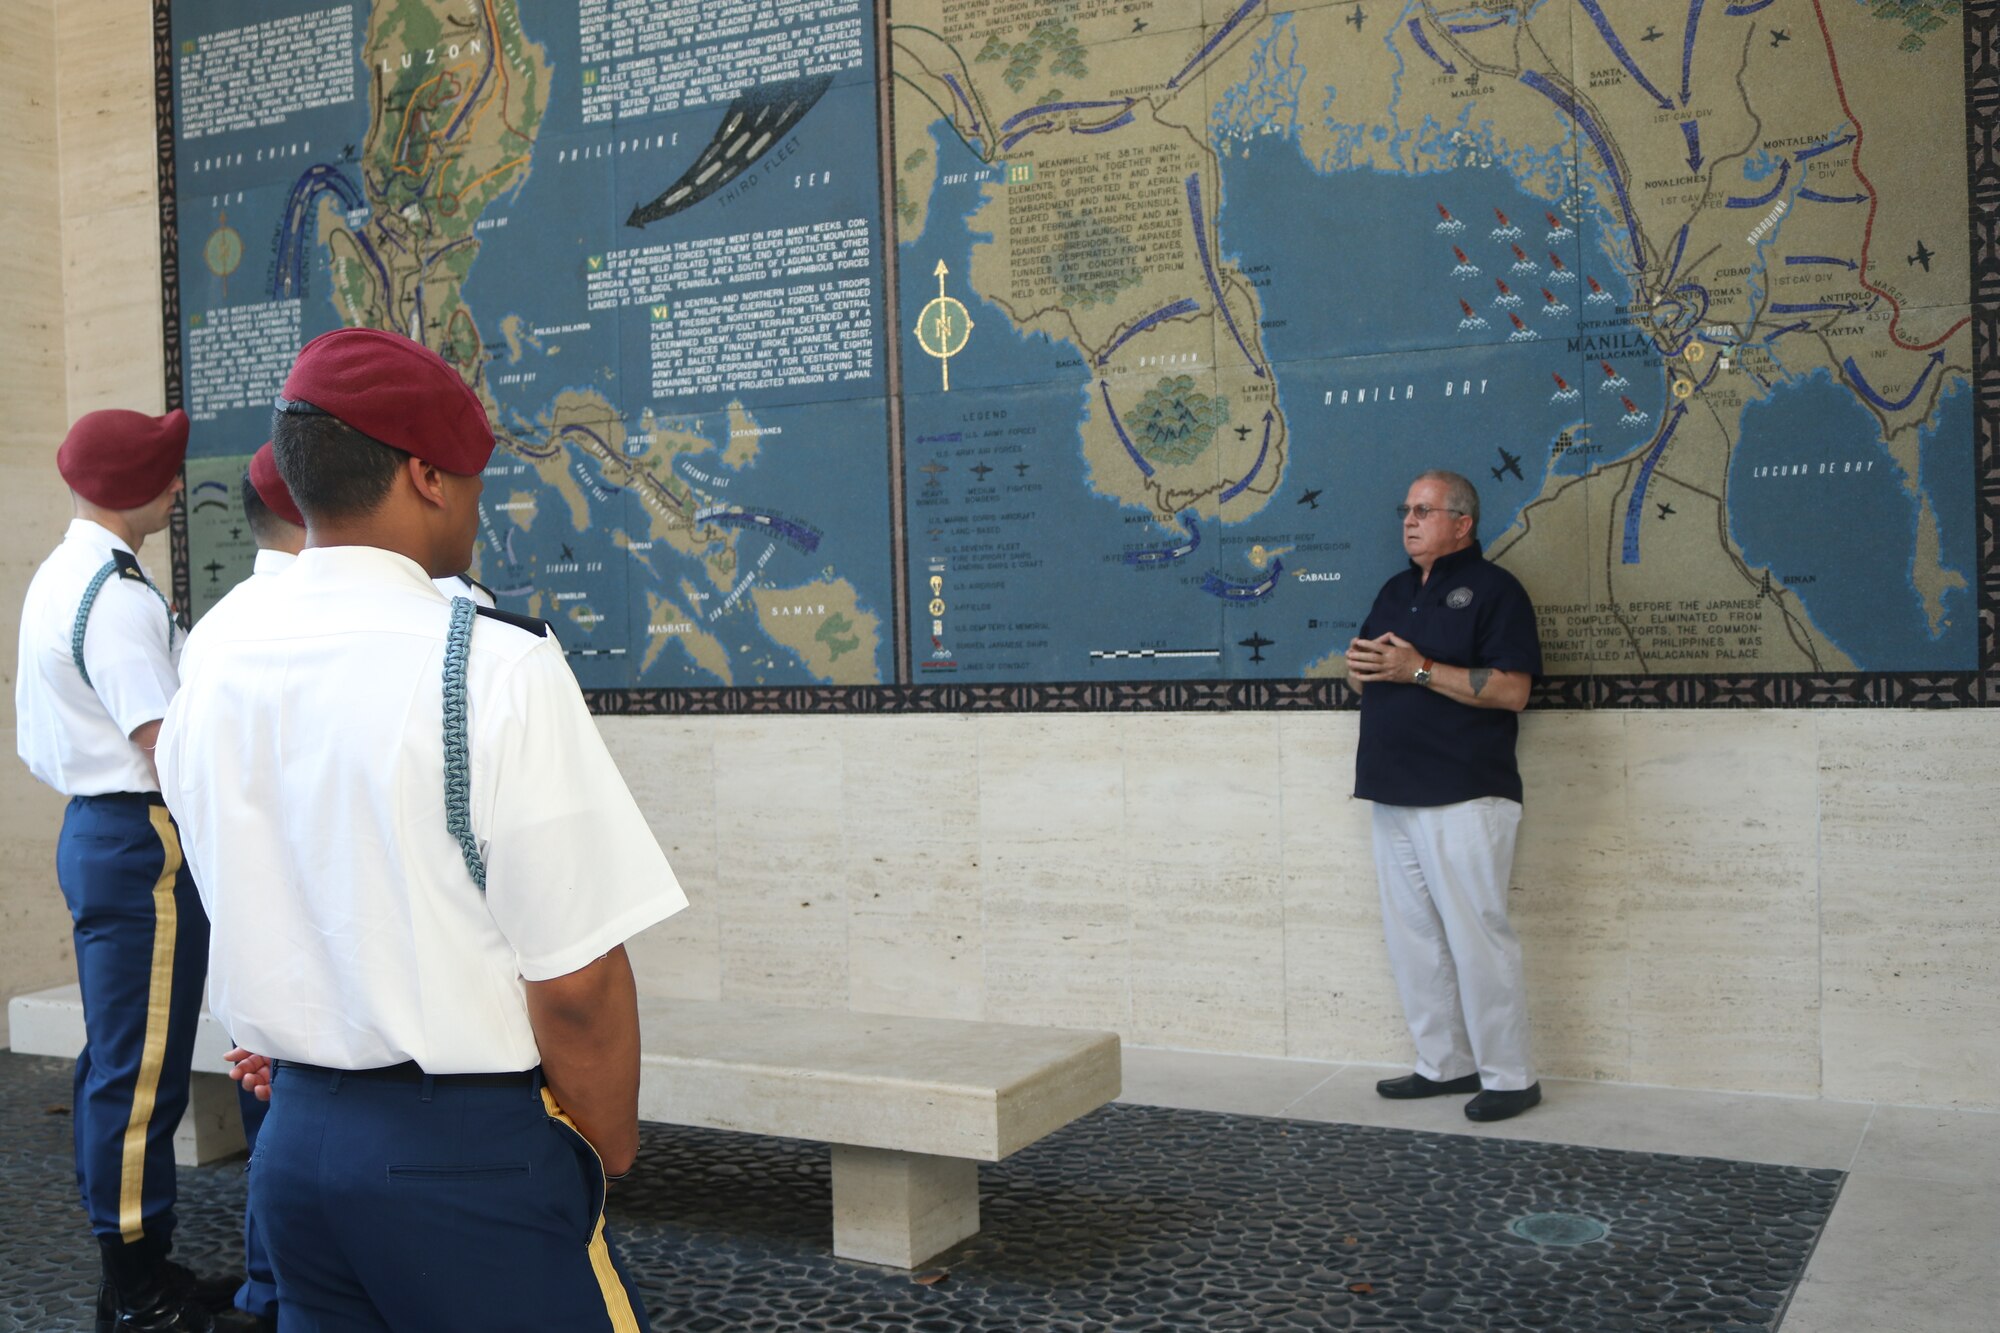 Bobby Bell, American Battle Monuments Commission deputy superintendent, talks to soldiers from the 2nd Battalion, 503rd Infantry Regiment in Vicenza, Italy, during the 75th anniversary of the retaking of Corregidor Island ceremony at the Manila American Cemetery in Manila, Philippines, Feb. 17, 2020.